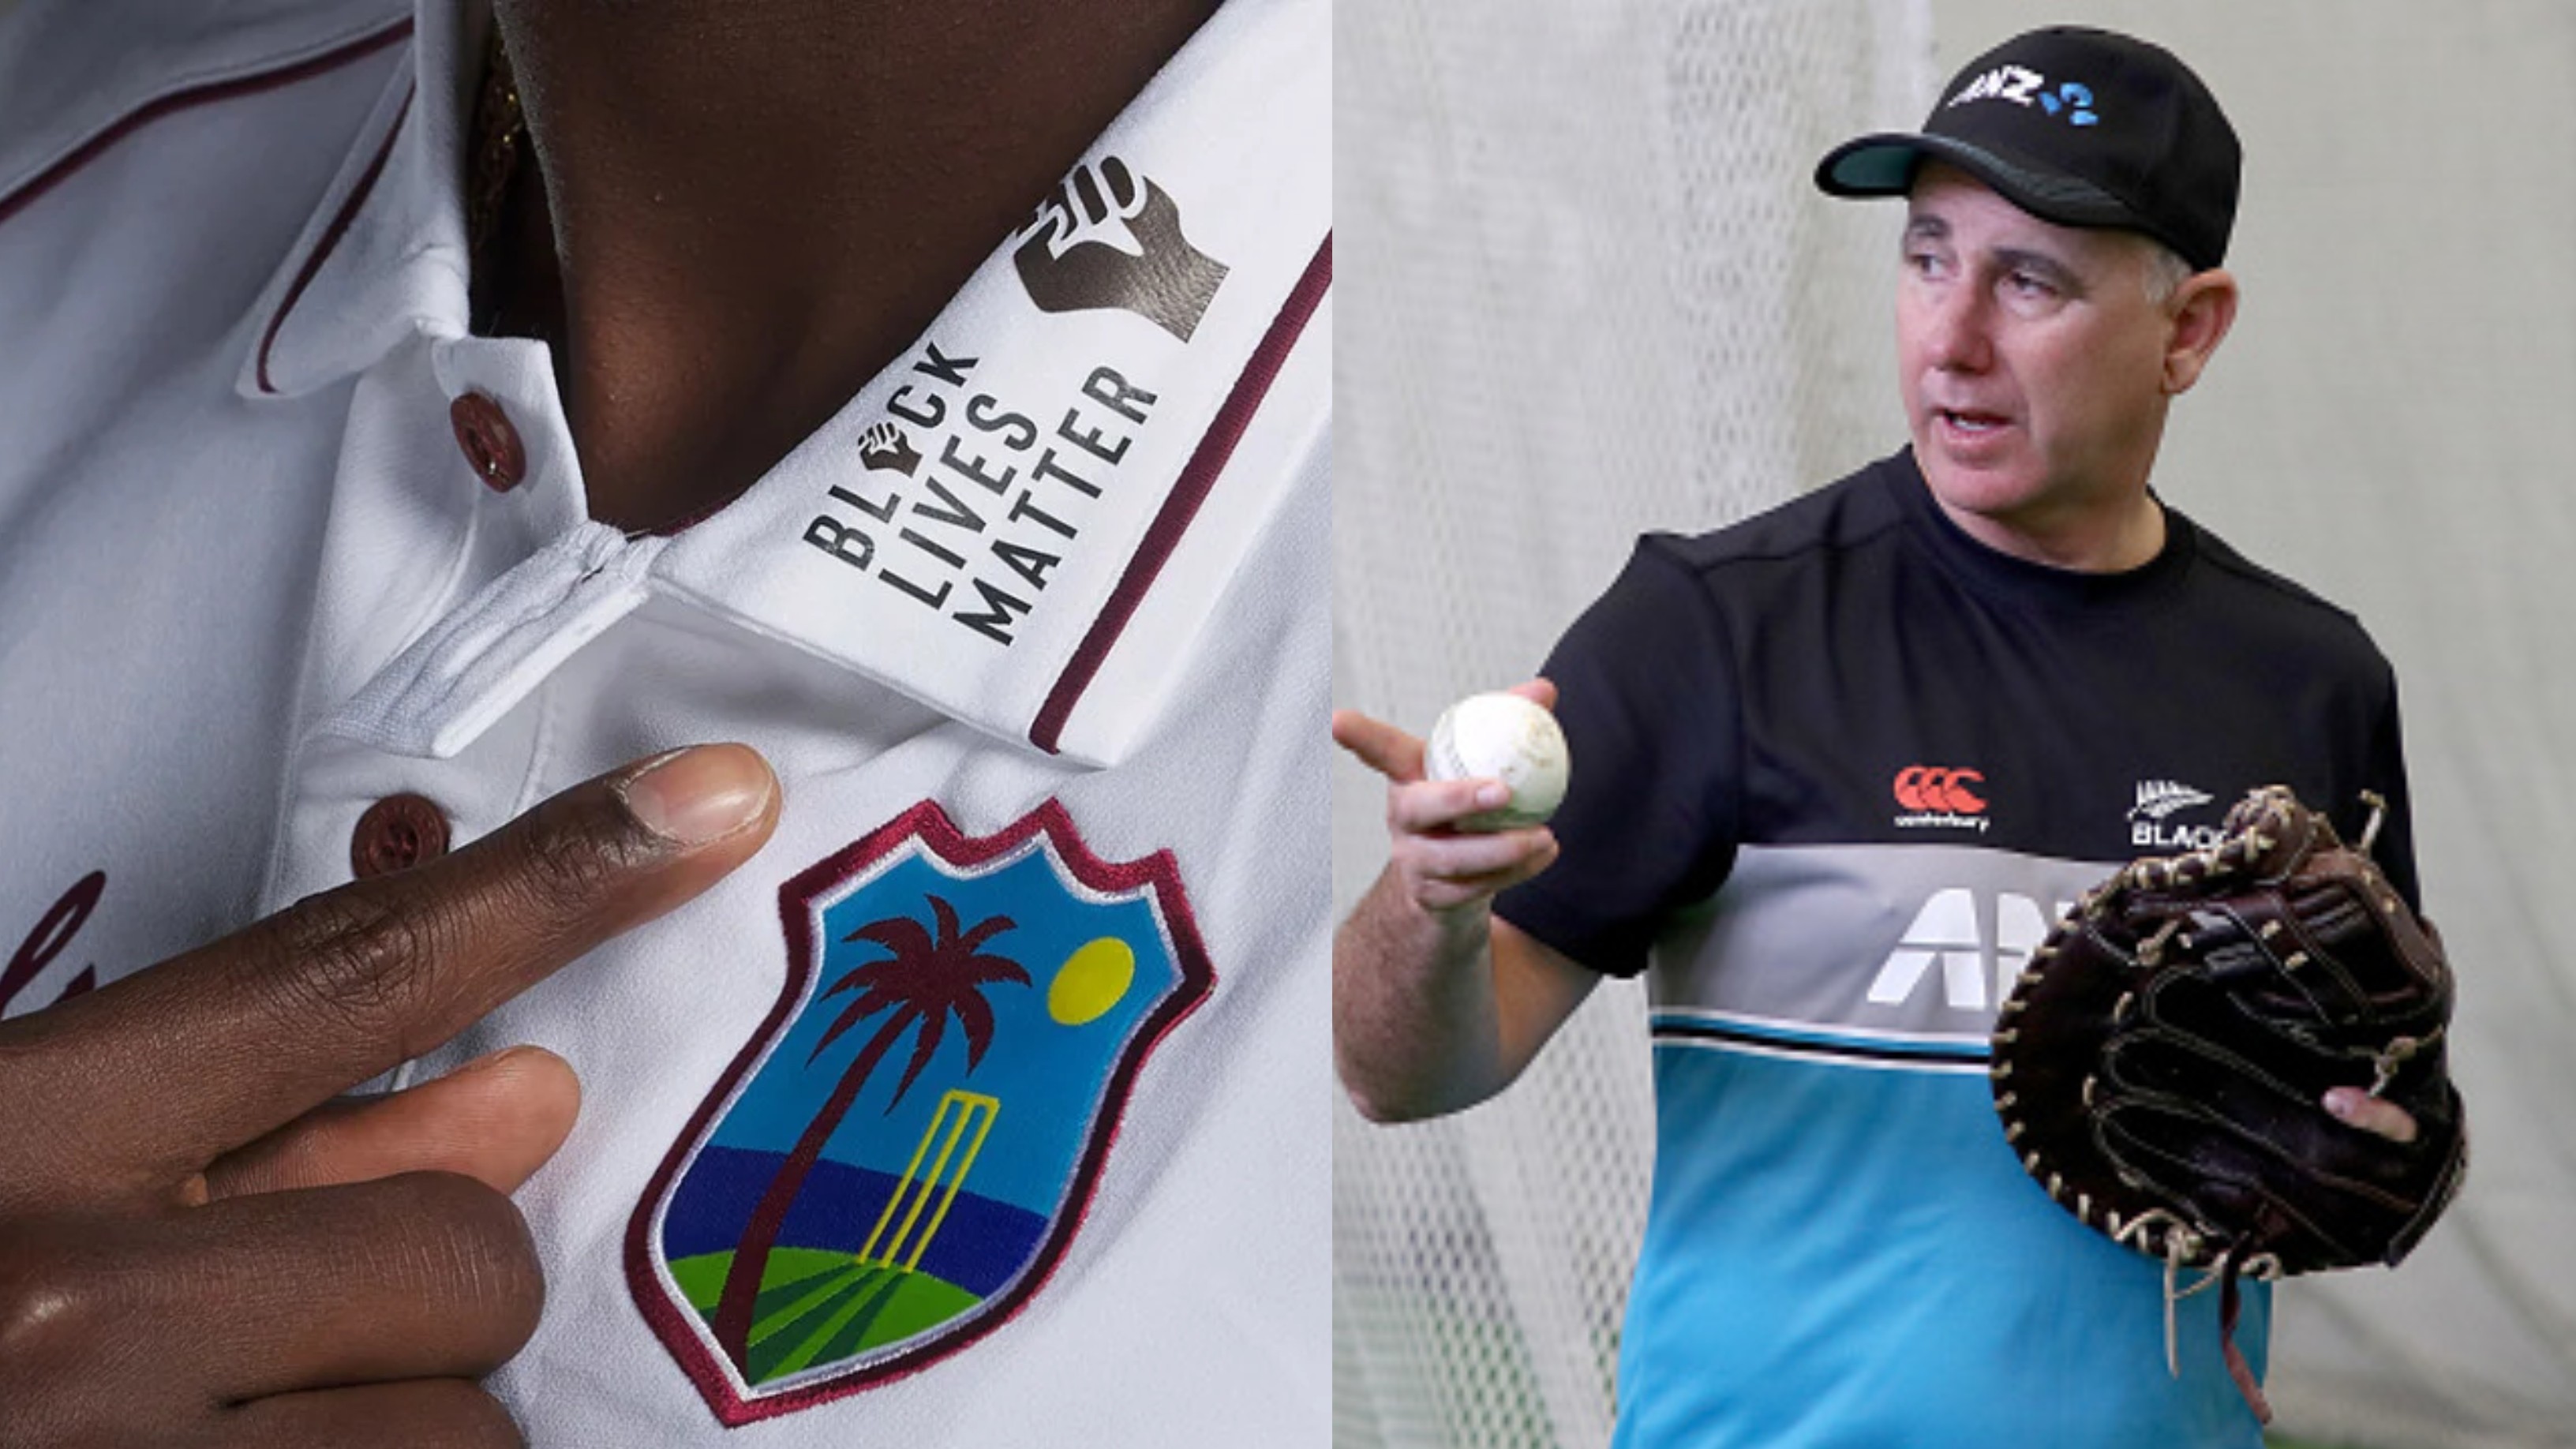 NZ v WI 2020: New Zealand and West Indies to discuss actions to support BLM movement, says Gary Stead